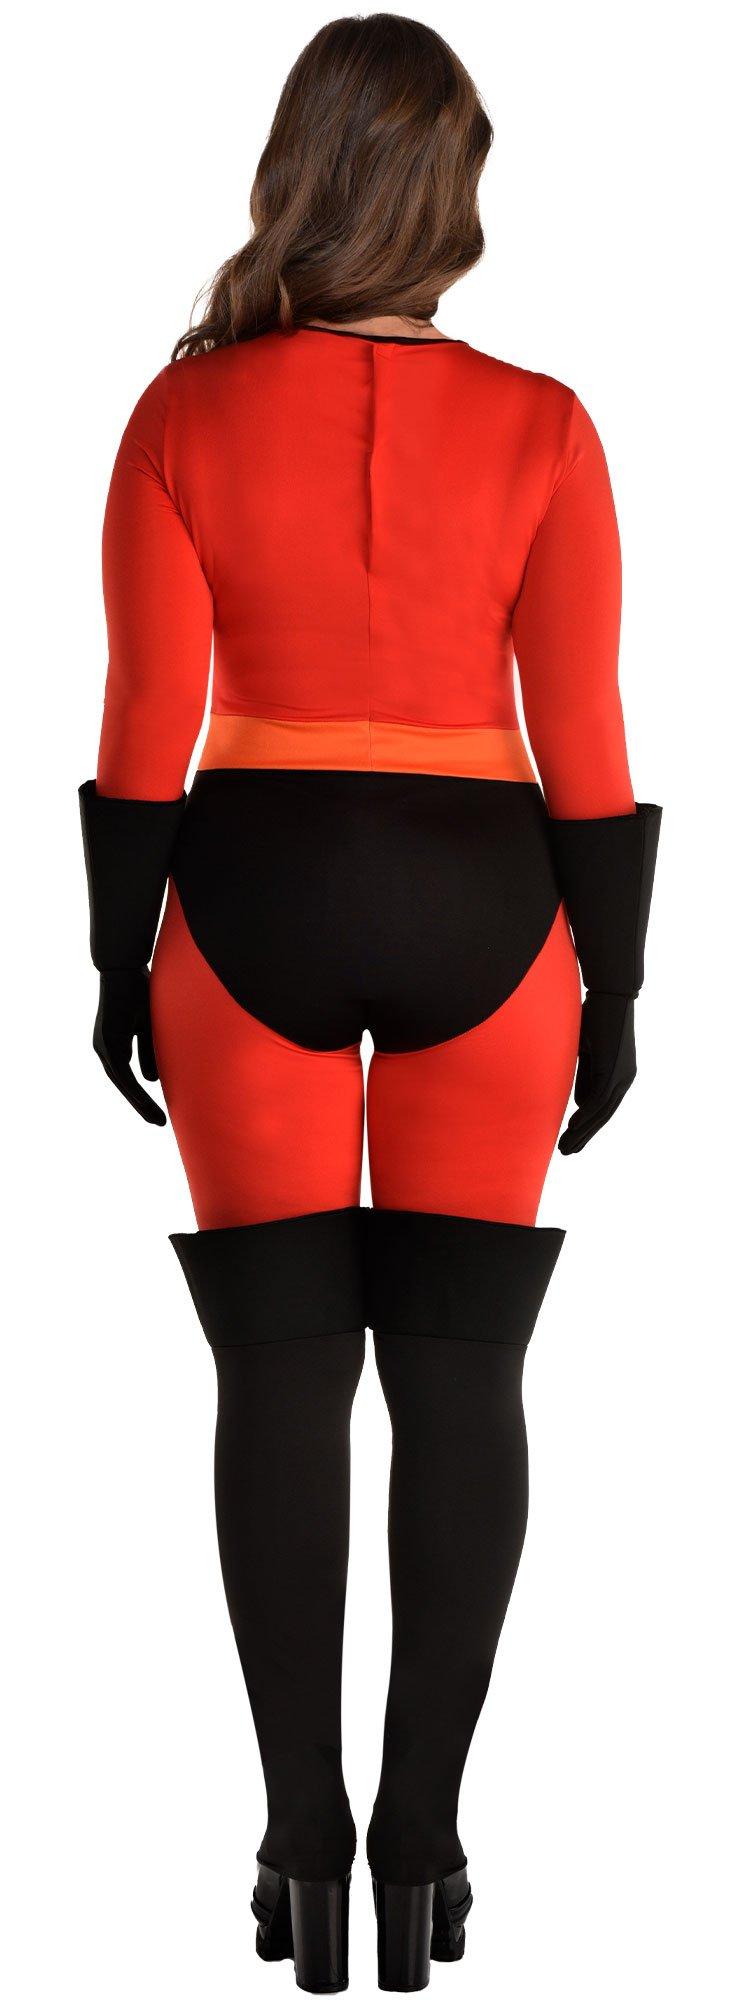 Adult Mrs. Incredible Deluxe Costume - The Incredibles